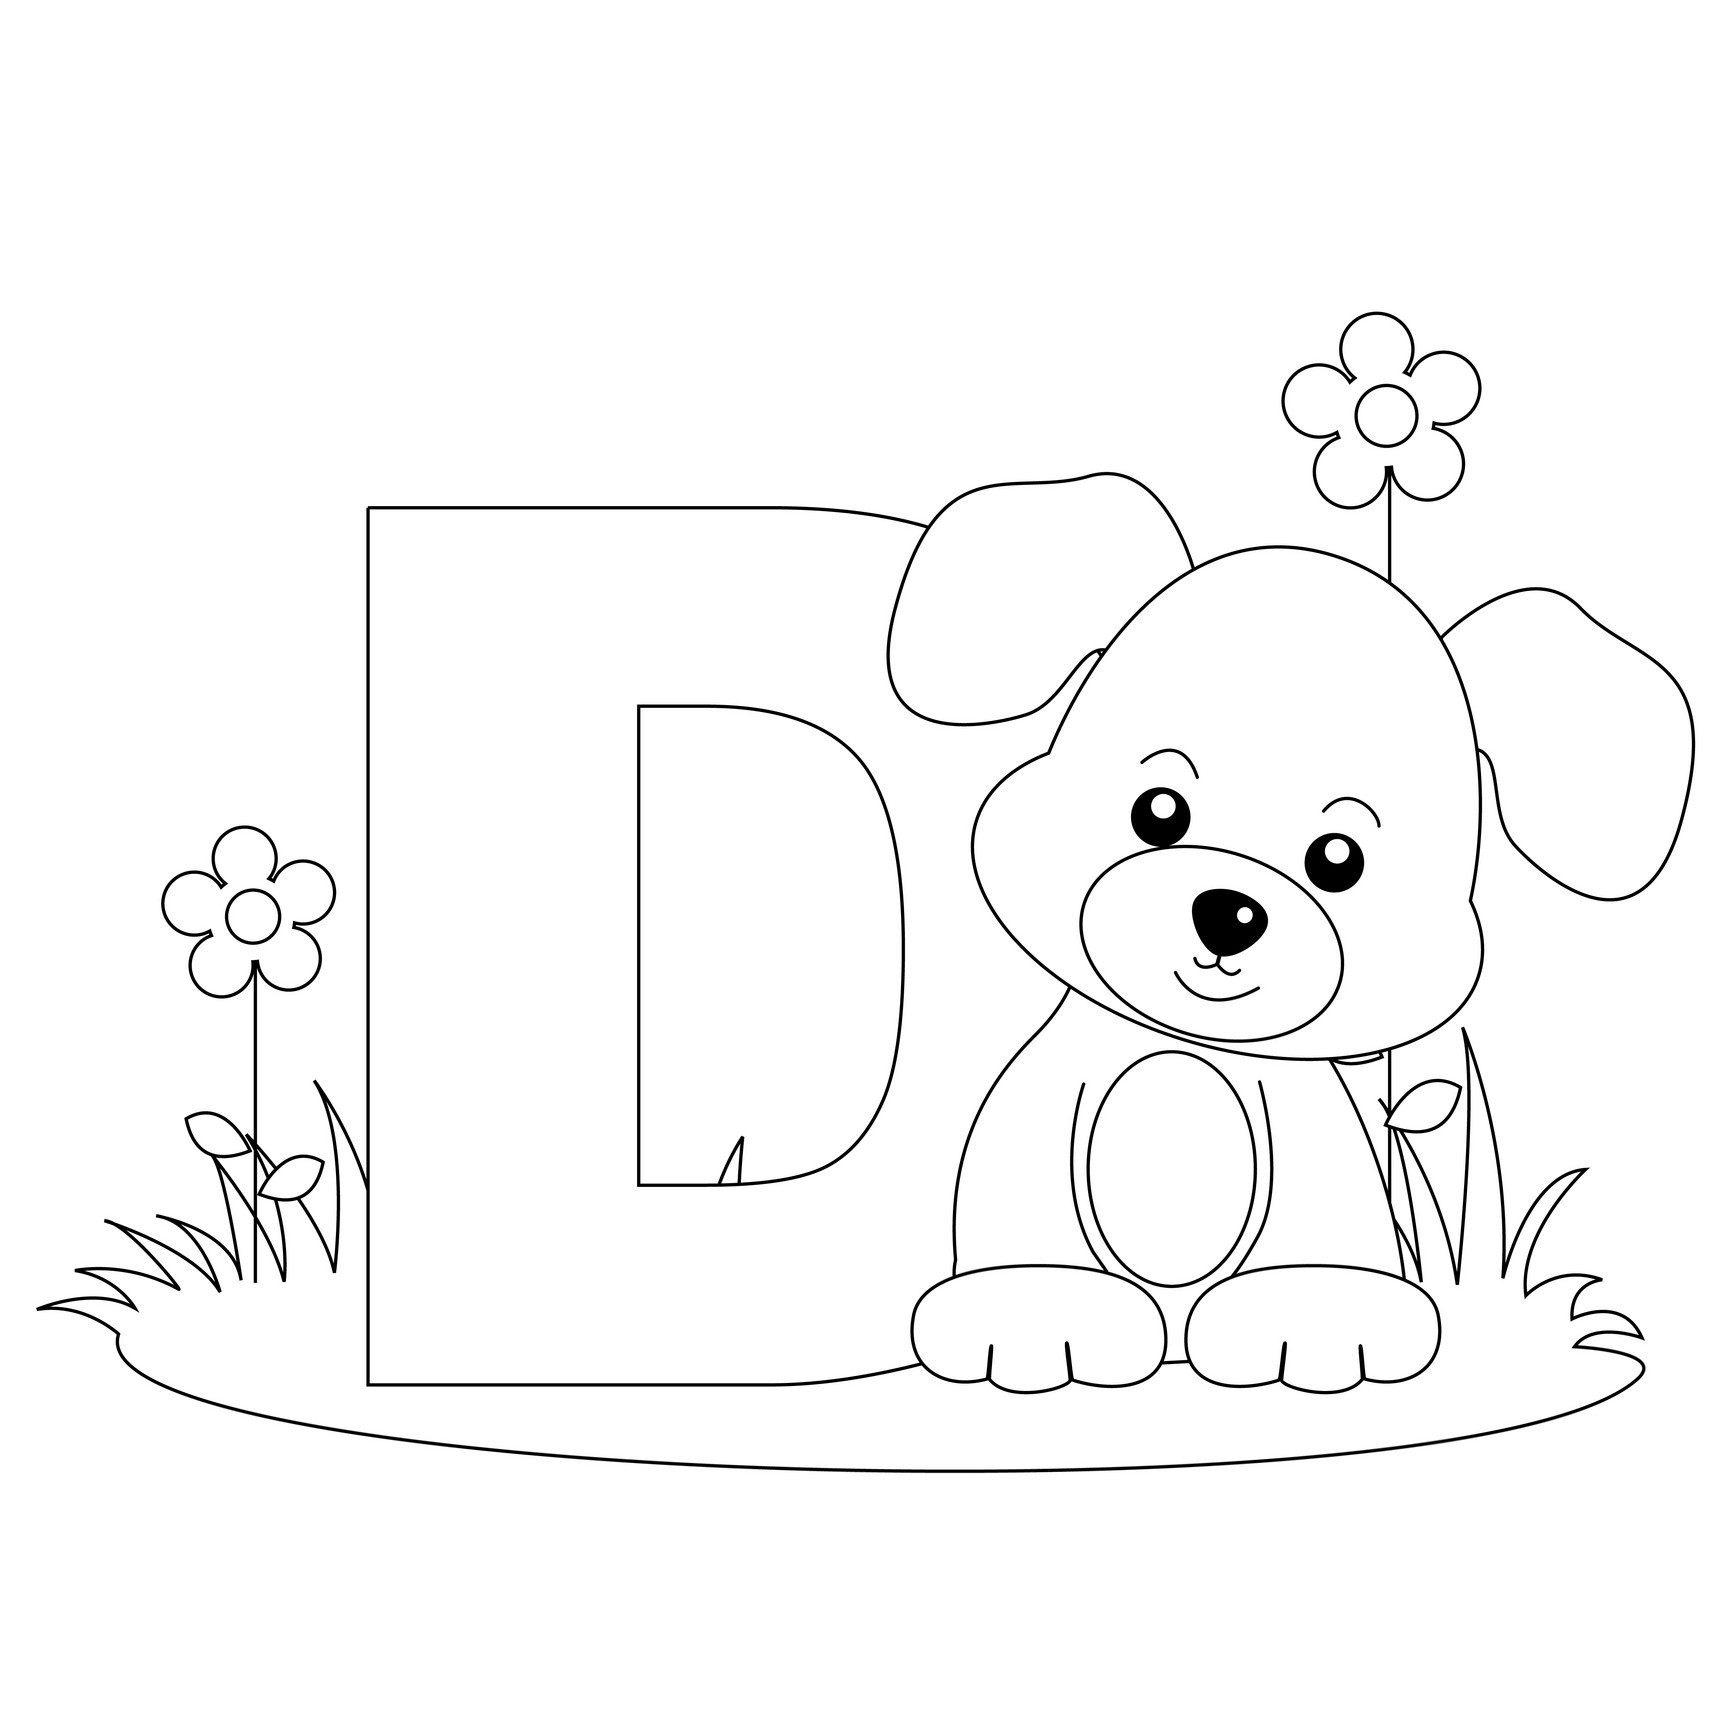 Coloring Pages Alphabet Printable
 Free Printable Alphabet Coloring Pages for Kids Best